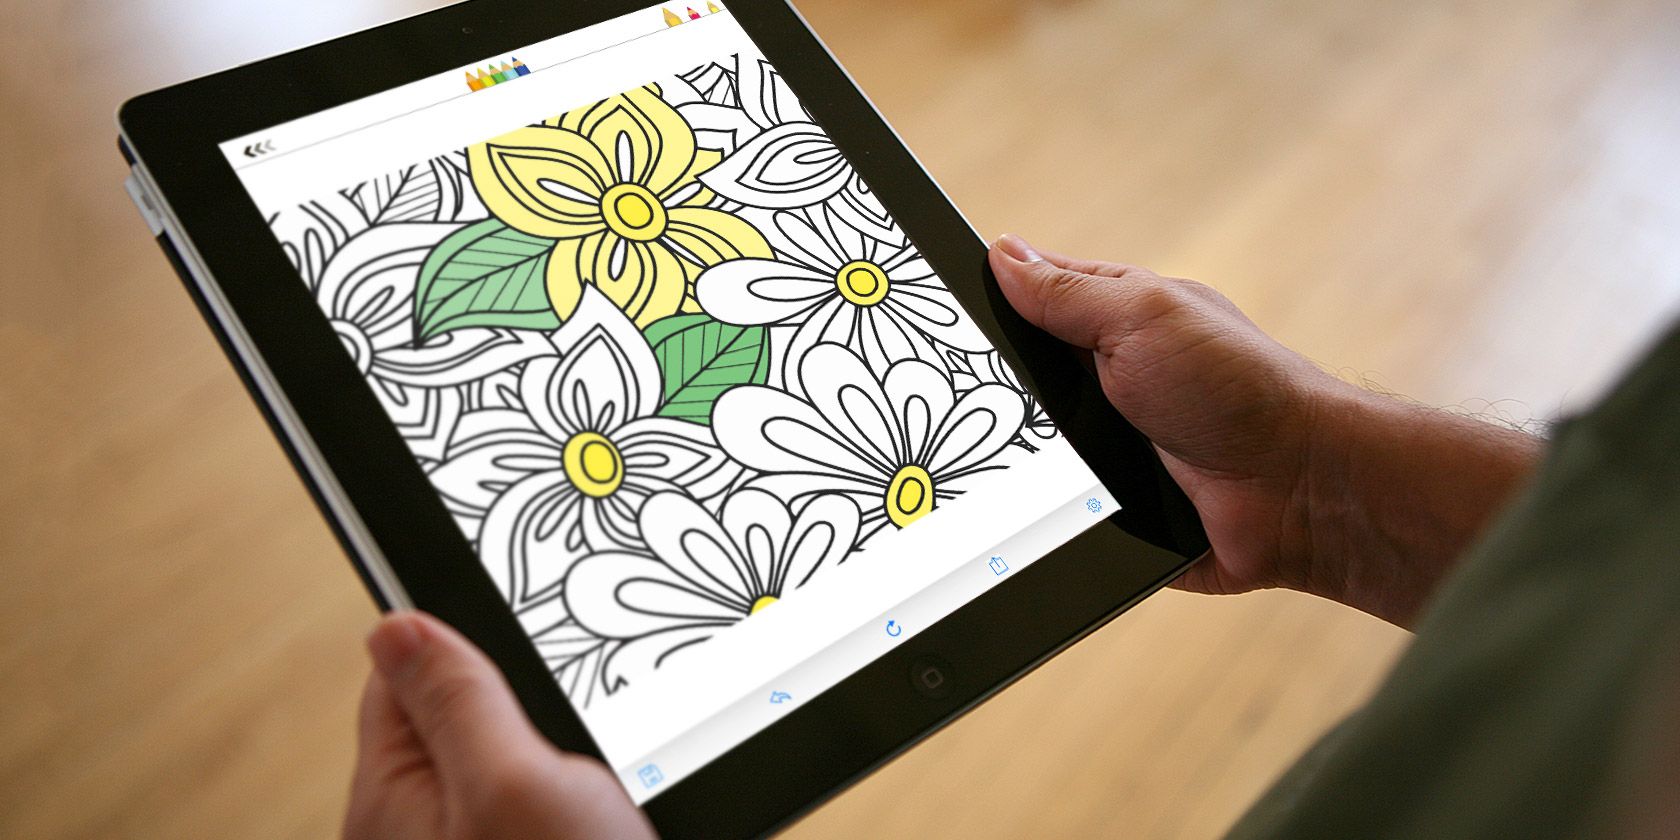 42-best-coloring-apps-for-adults-ipad-amazon-colorfy-coloring-book-for-adults-images